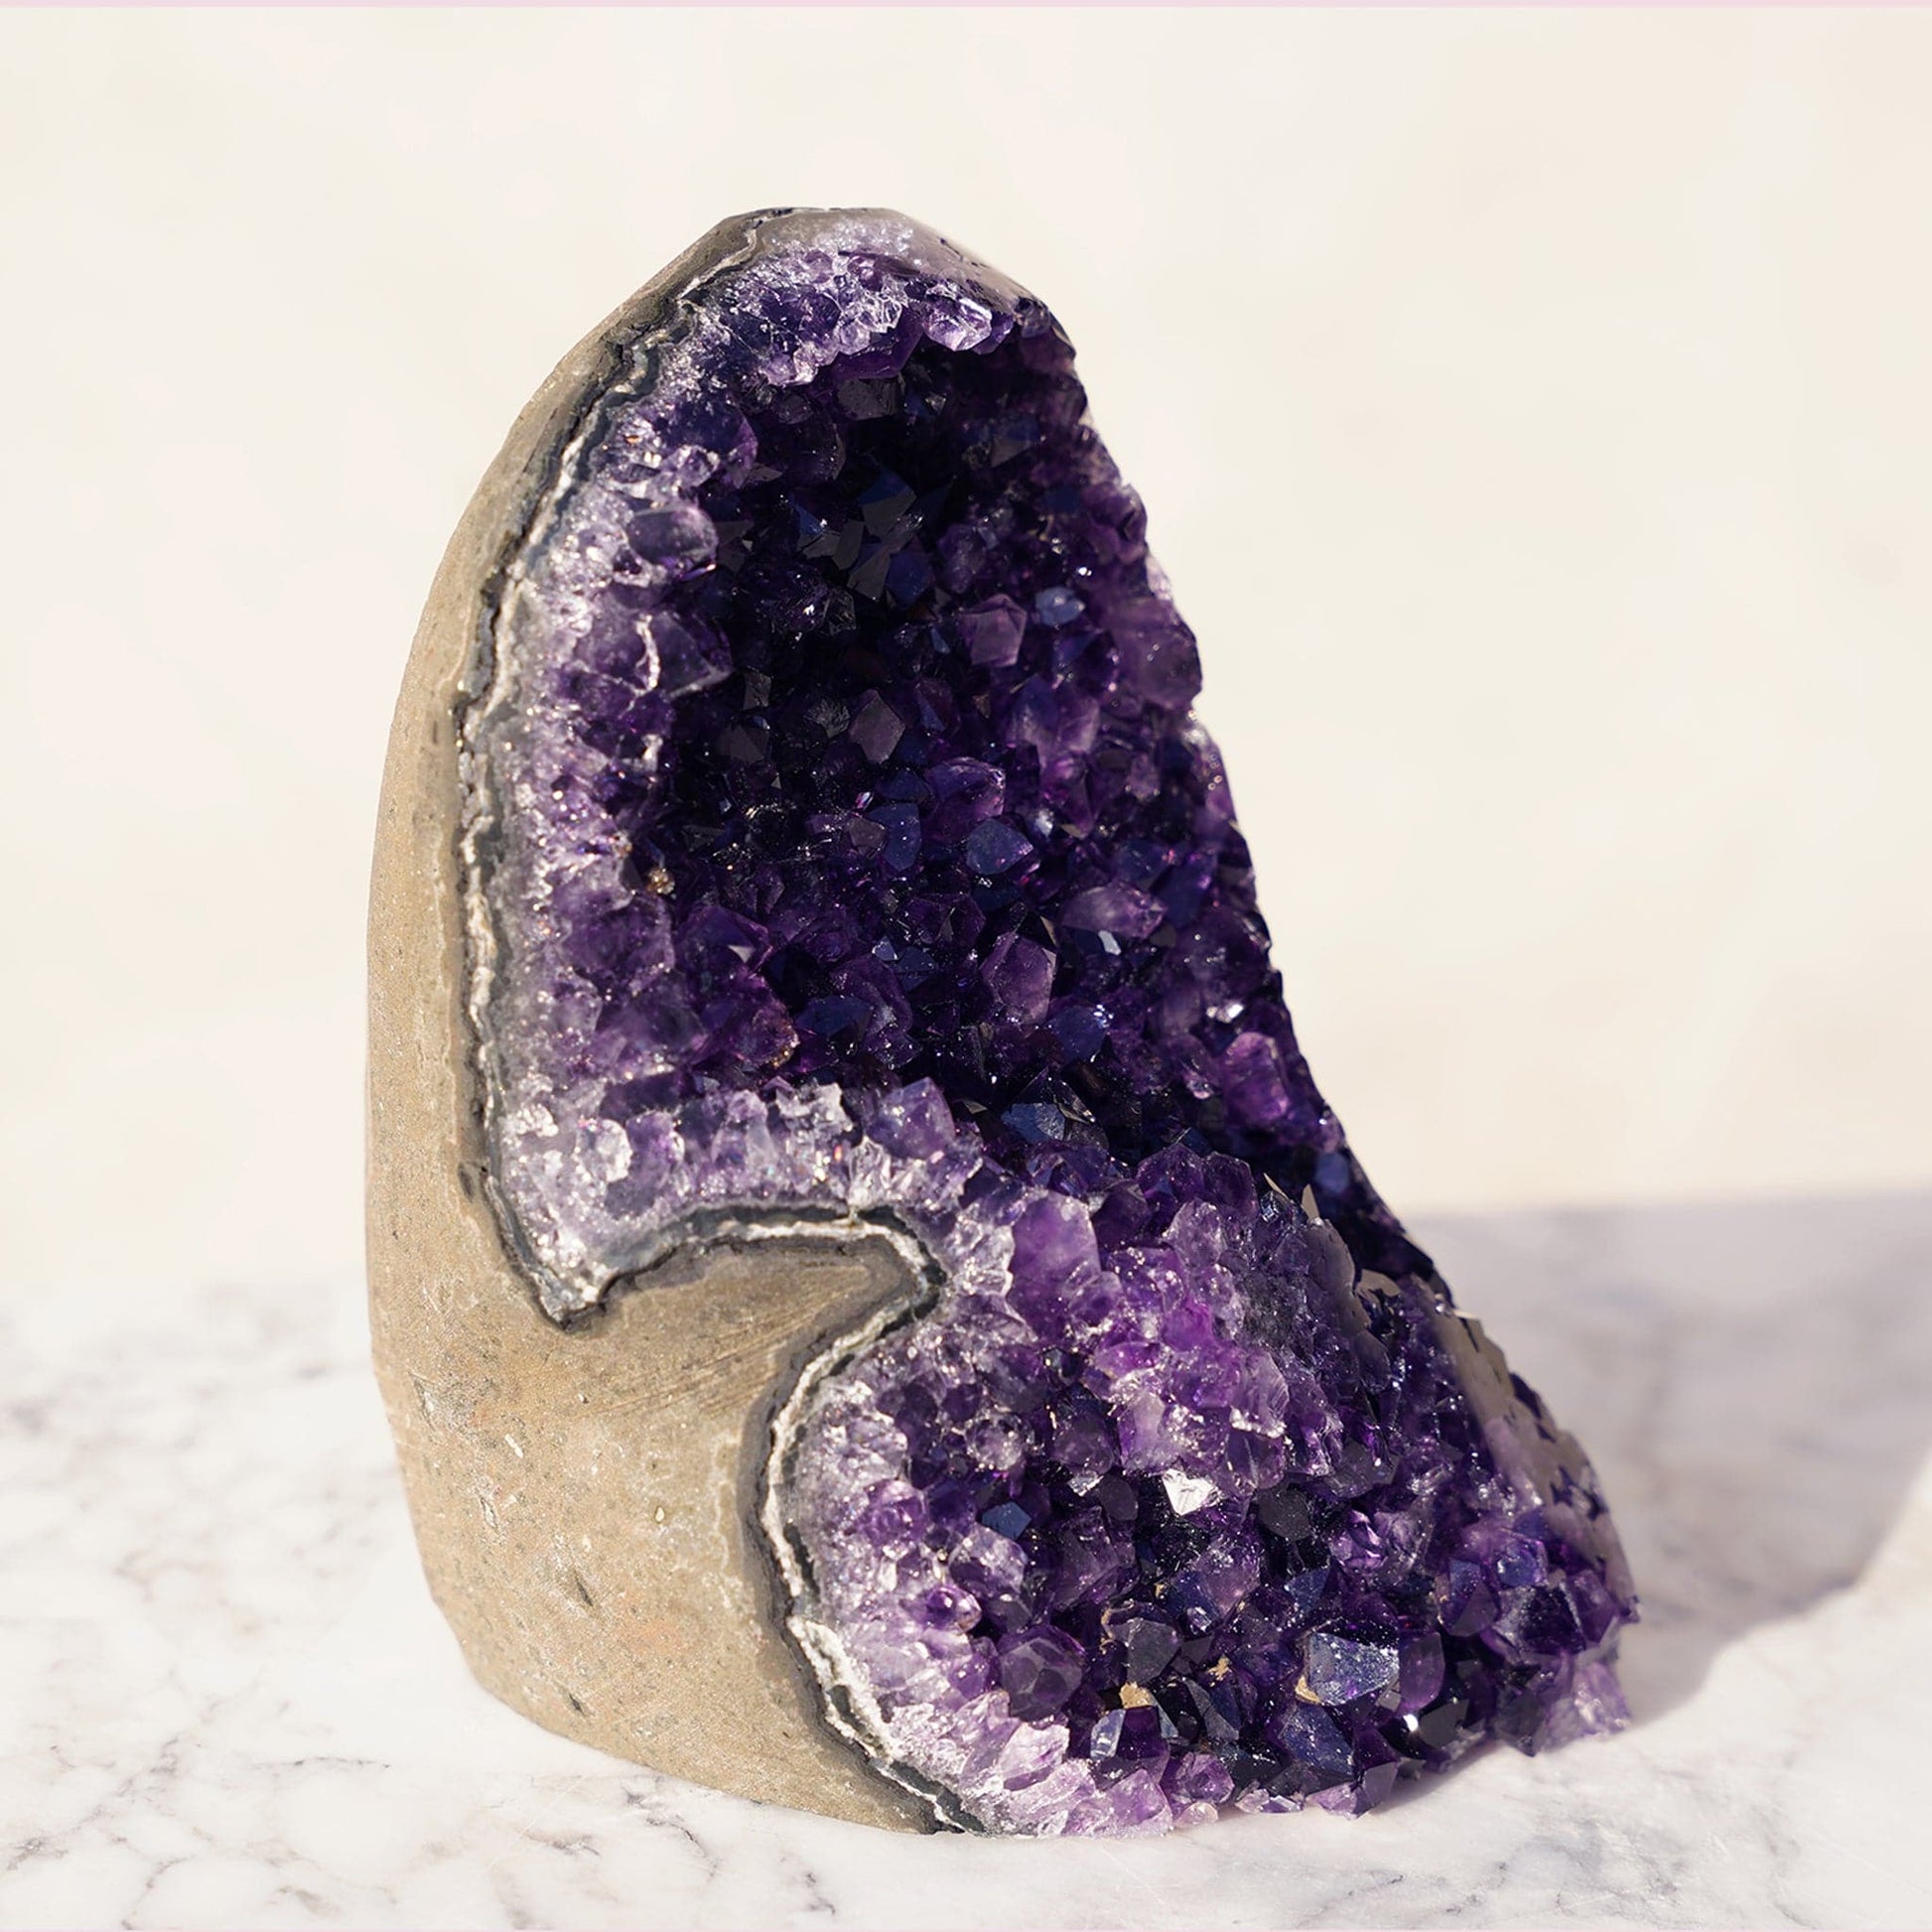 Cut-base amethyst geode with stunning multi-toned purple peaks, just to reveal an even more complex composition of fascinating details. Stalactites and true light-reflecting crystal peaks.